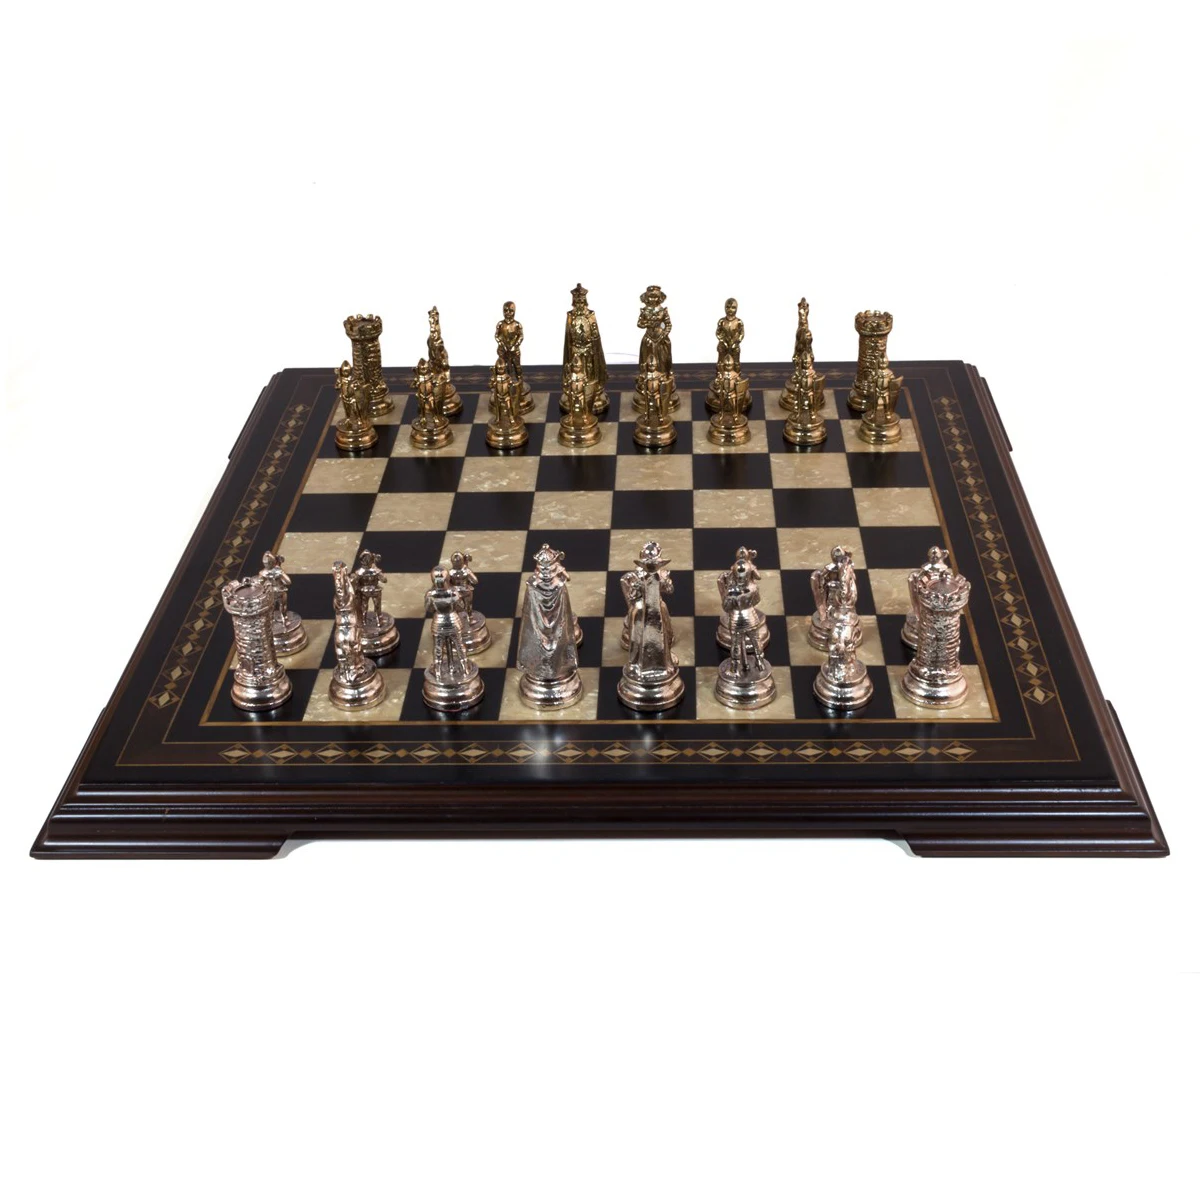 22.5'' Flat Footed Black Chessboard - Solid Beech Wood Mosaic Engraved Chess Board Game Gift Items Deck Box Checkers Шахматы шахматы практикум по тактике